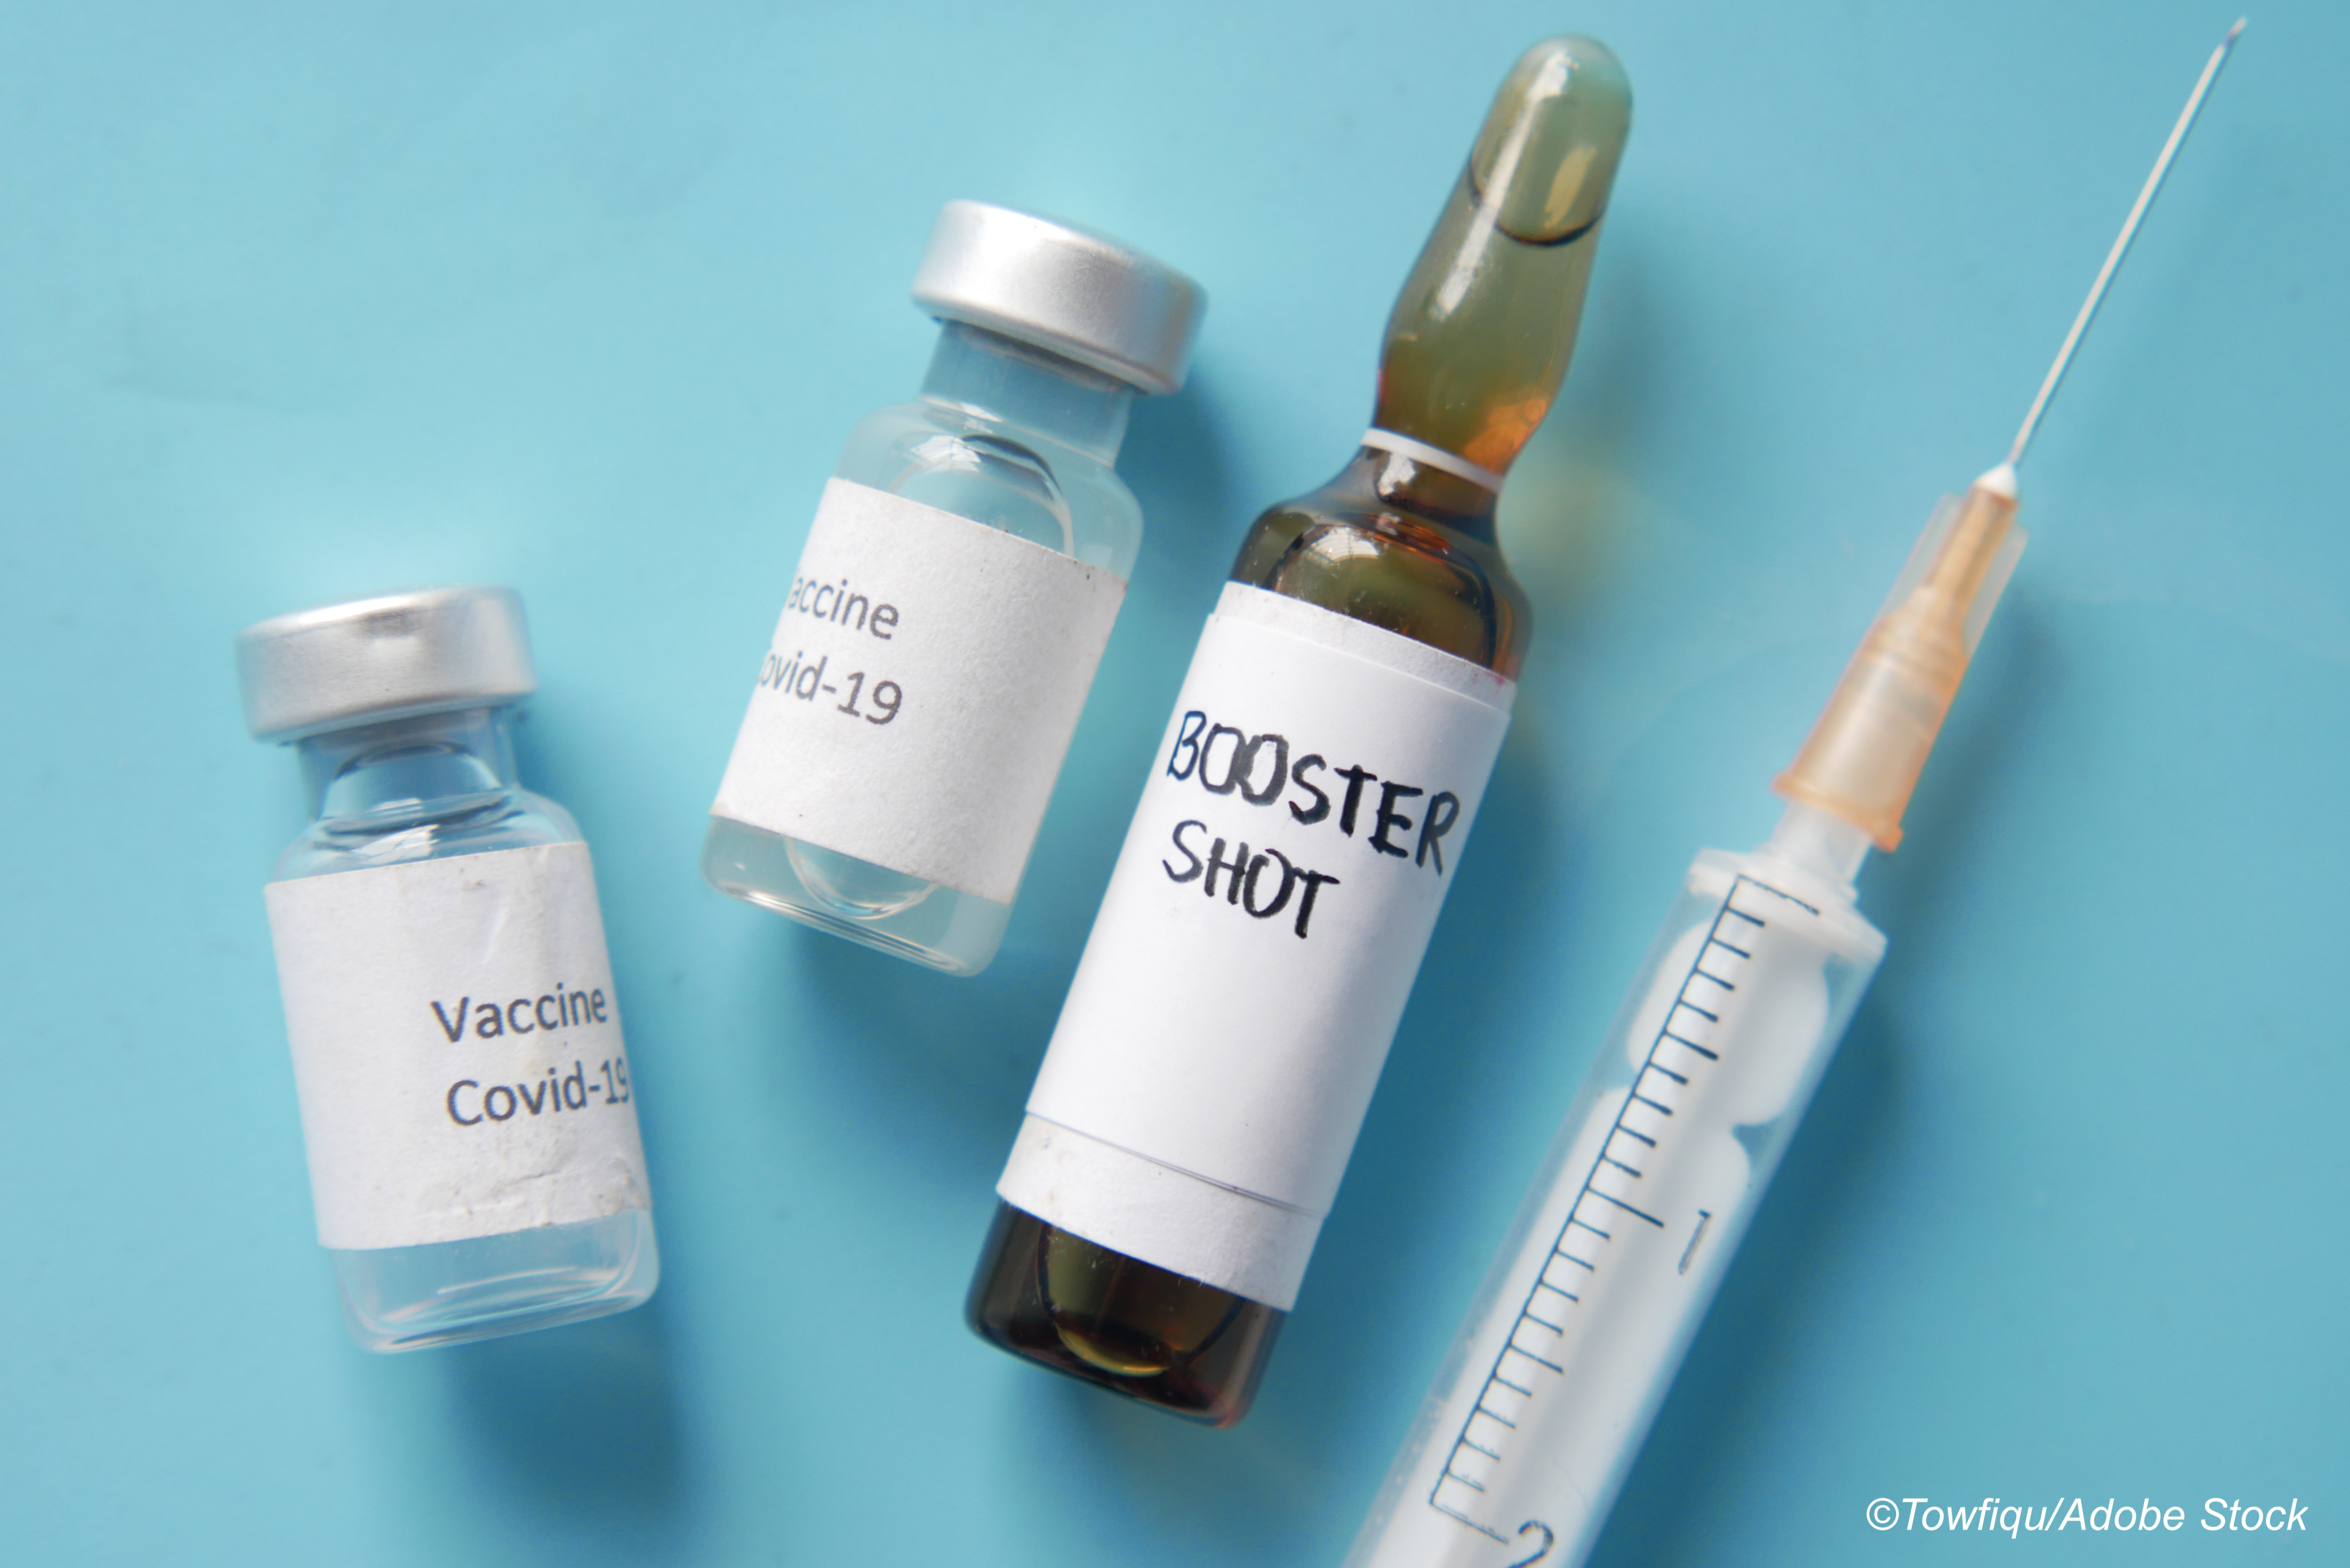 Mixing Primary Covid-19 Vaccine Doses Safe, Effective, Study Finds